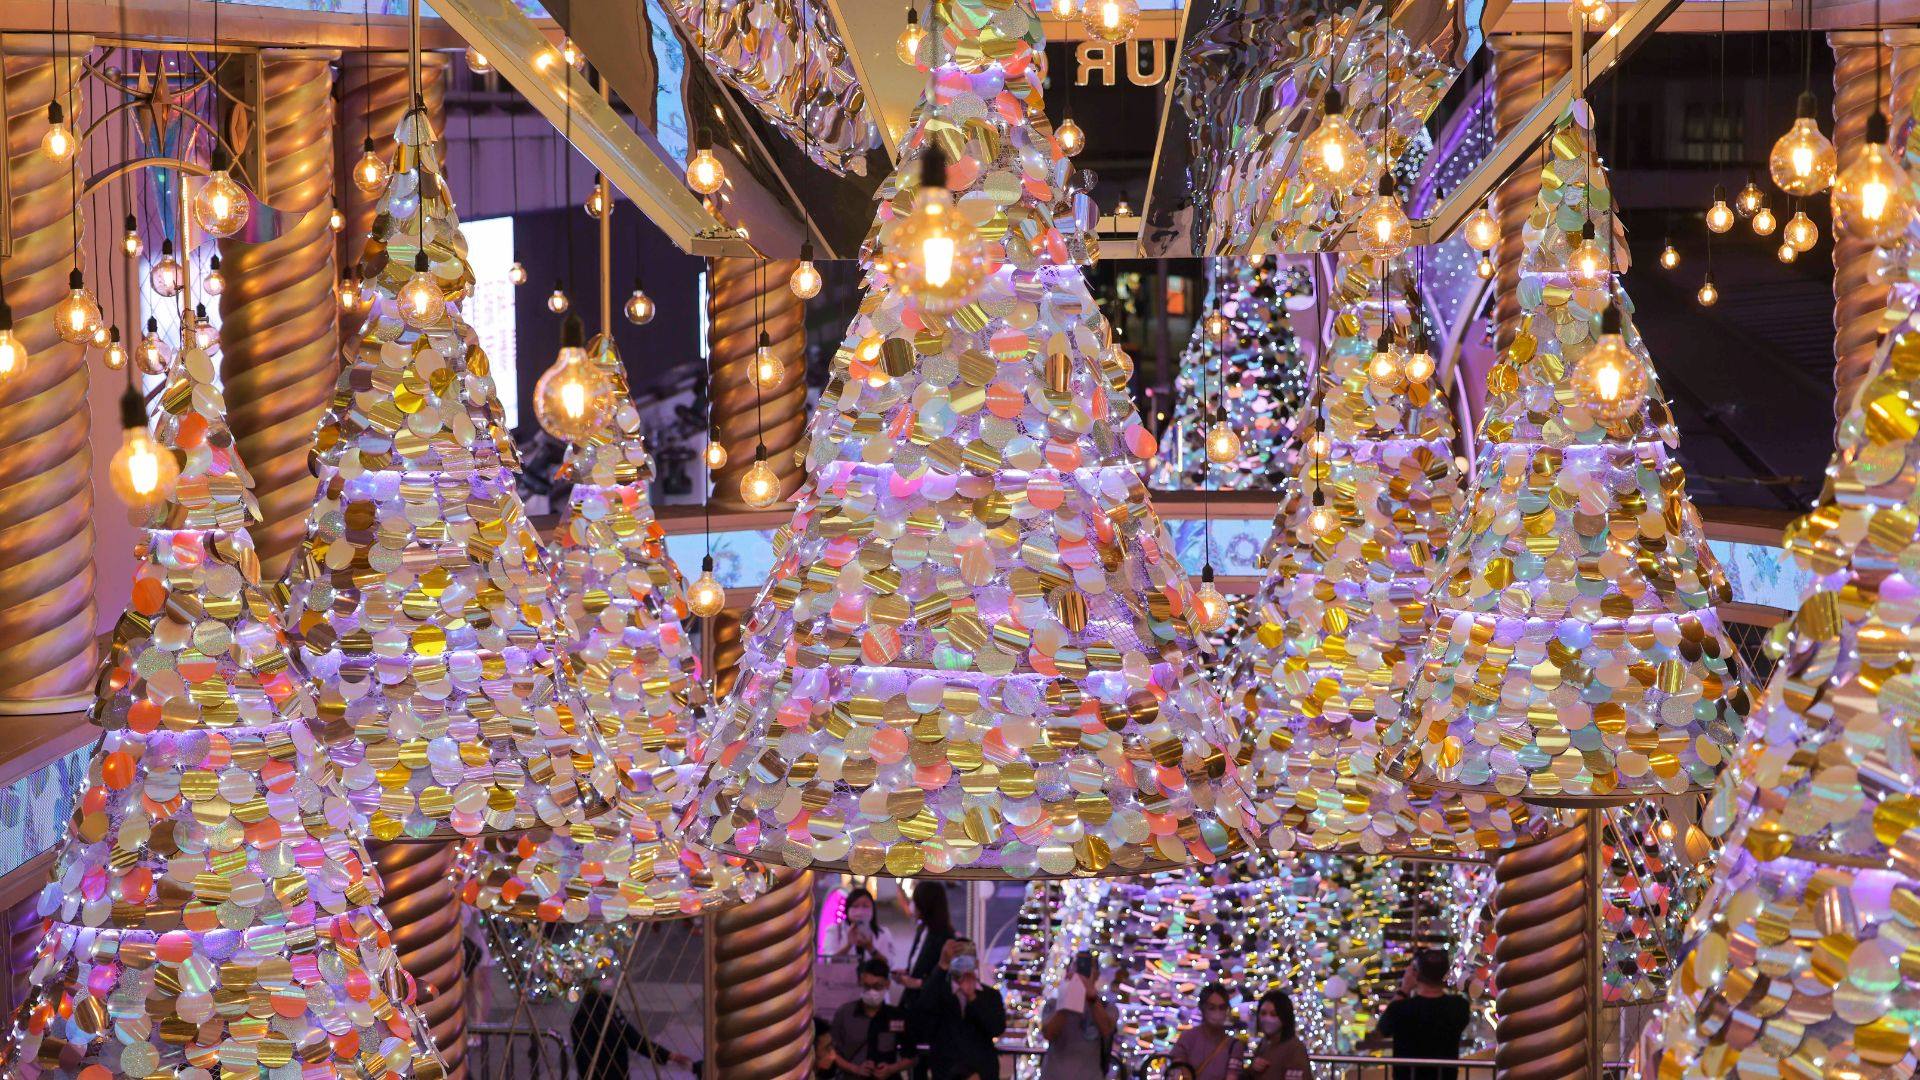 The UniChristmas festive installation at Harbour City in Hong Kong. Photo: Harbour City